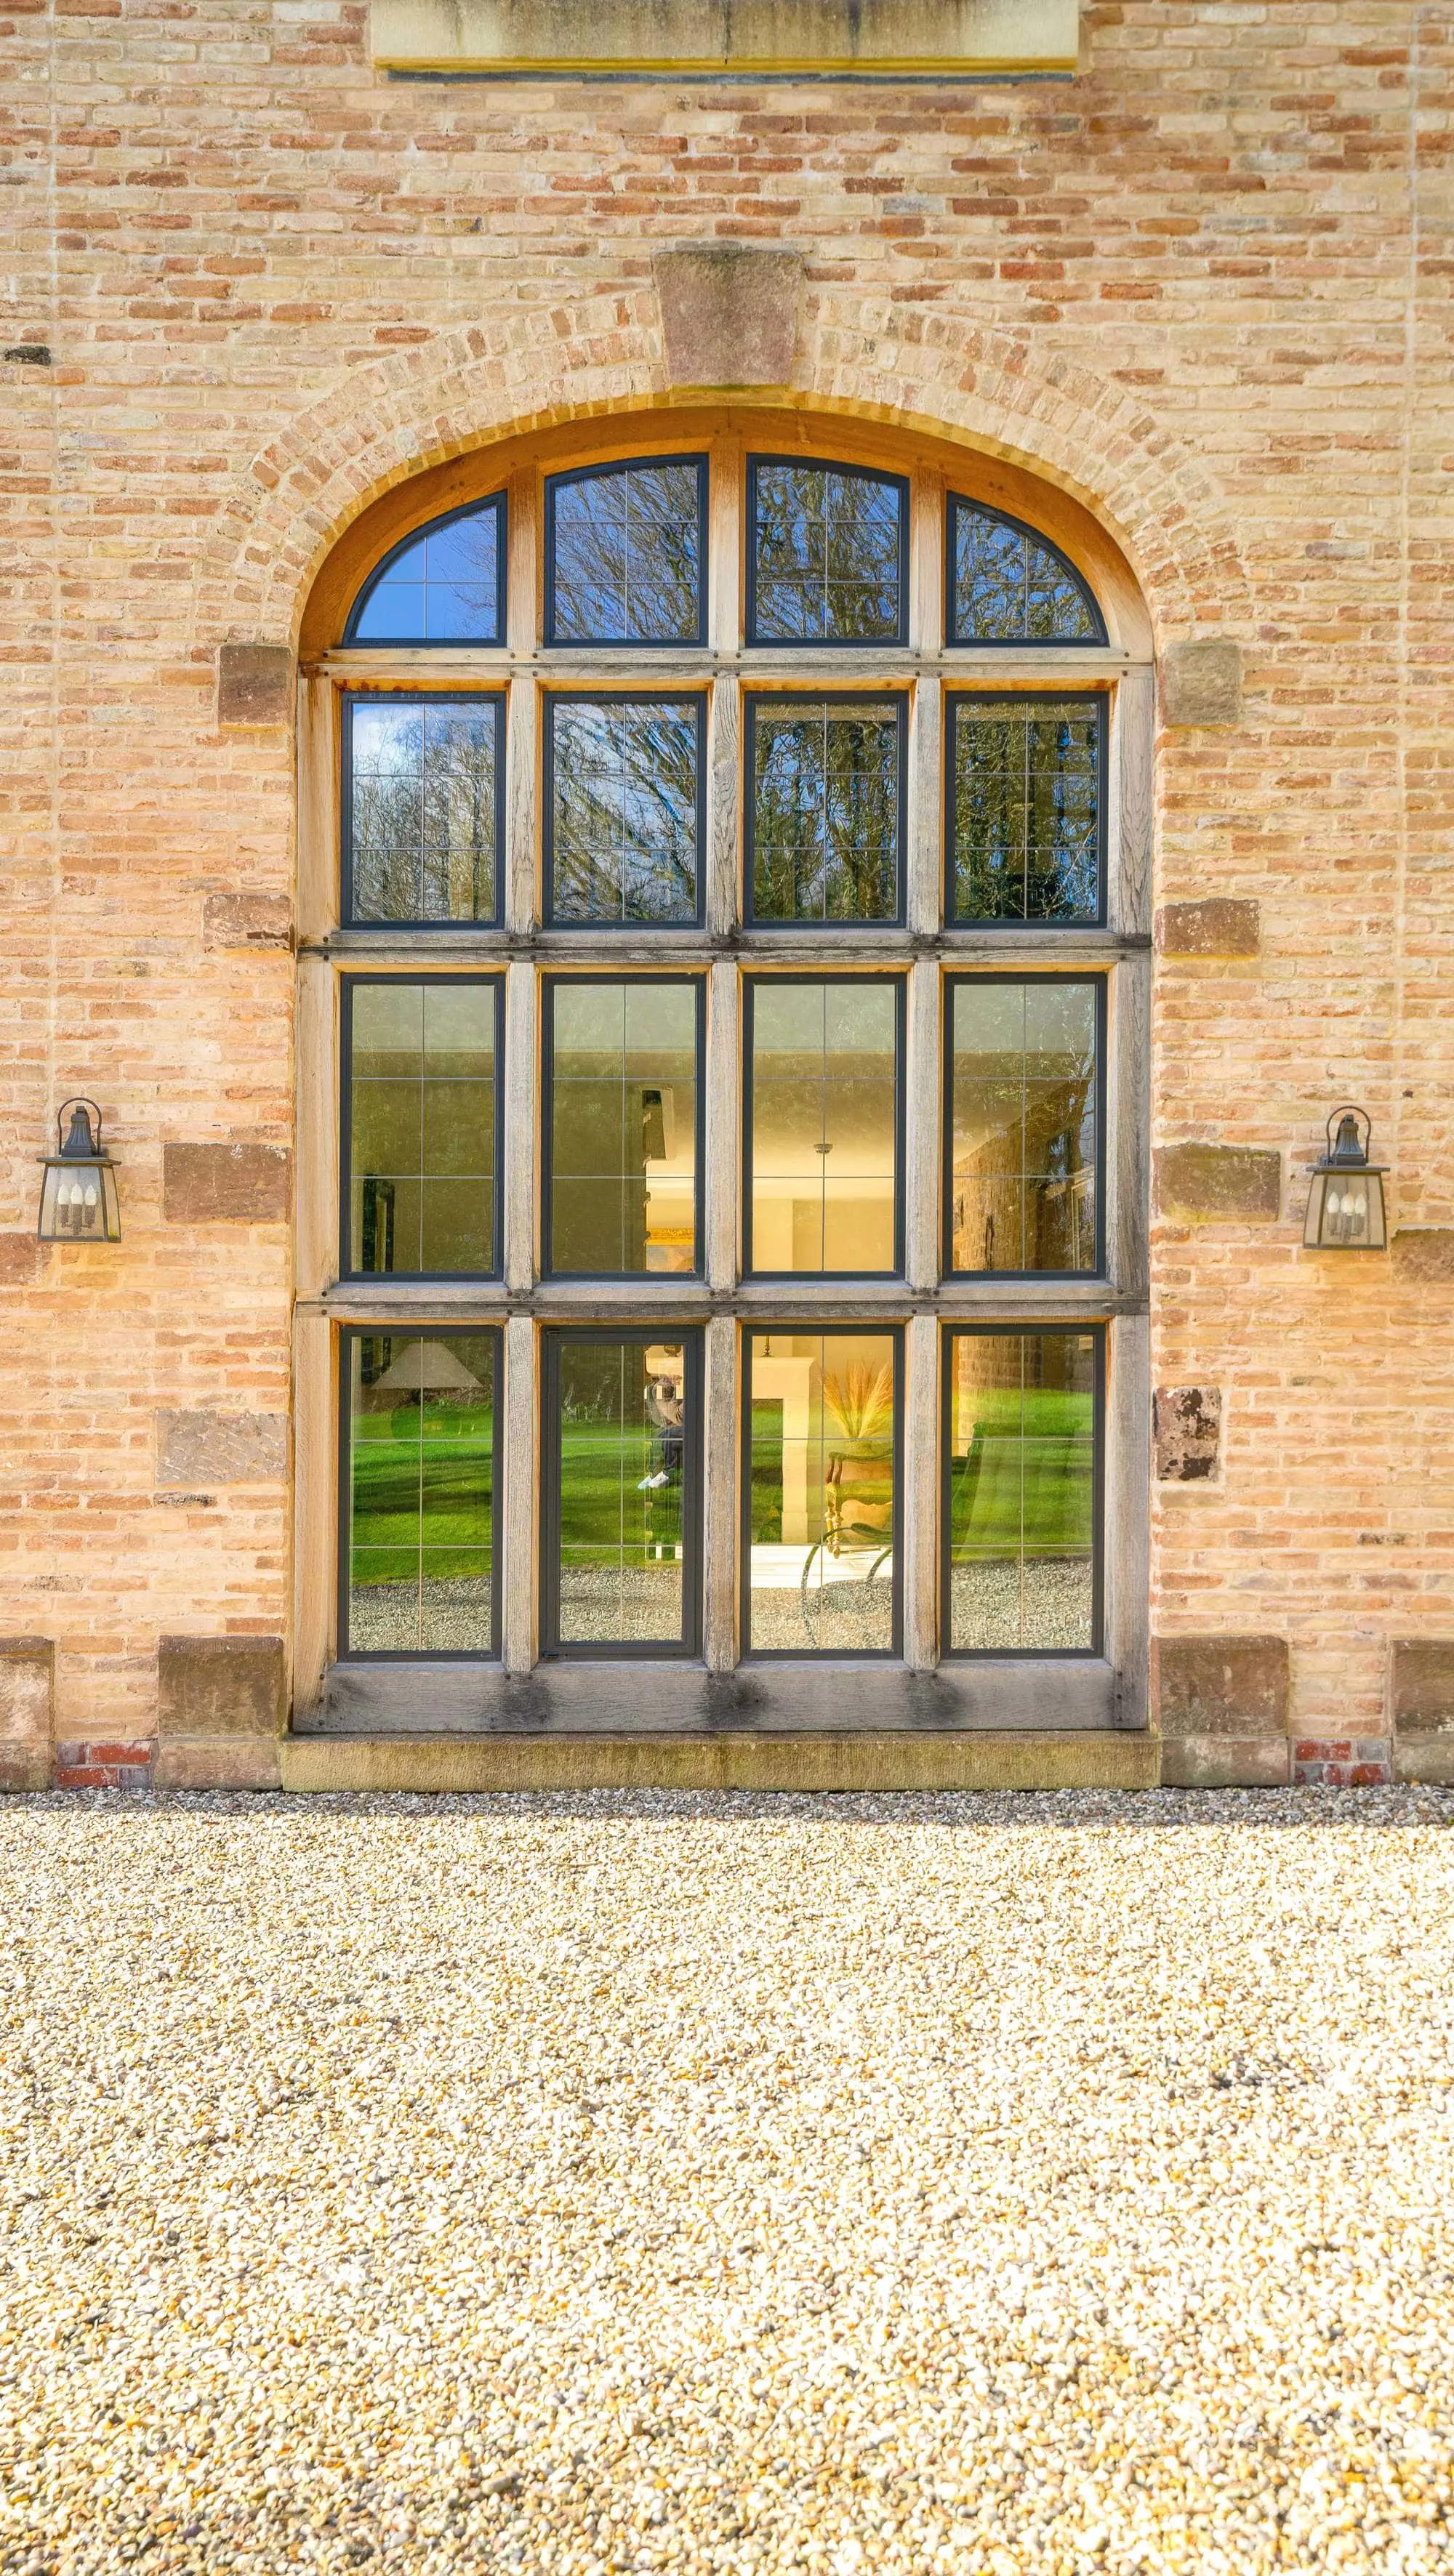 External view of the oak frame steel windows with lead lighting.